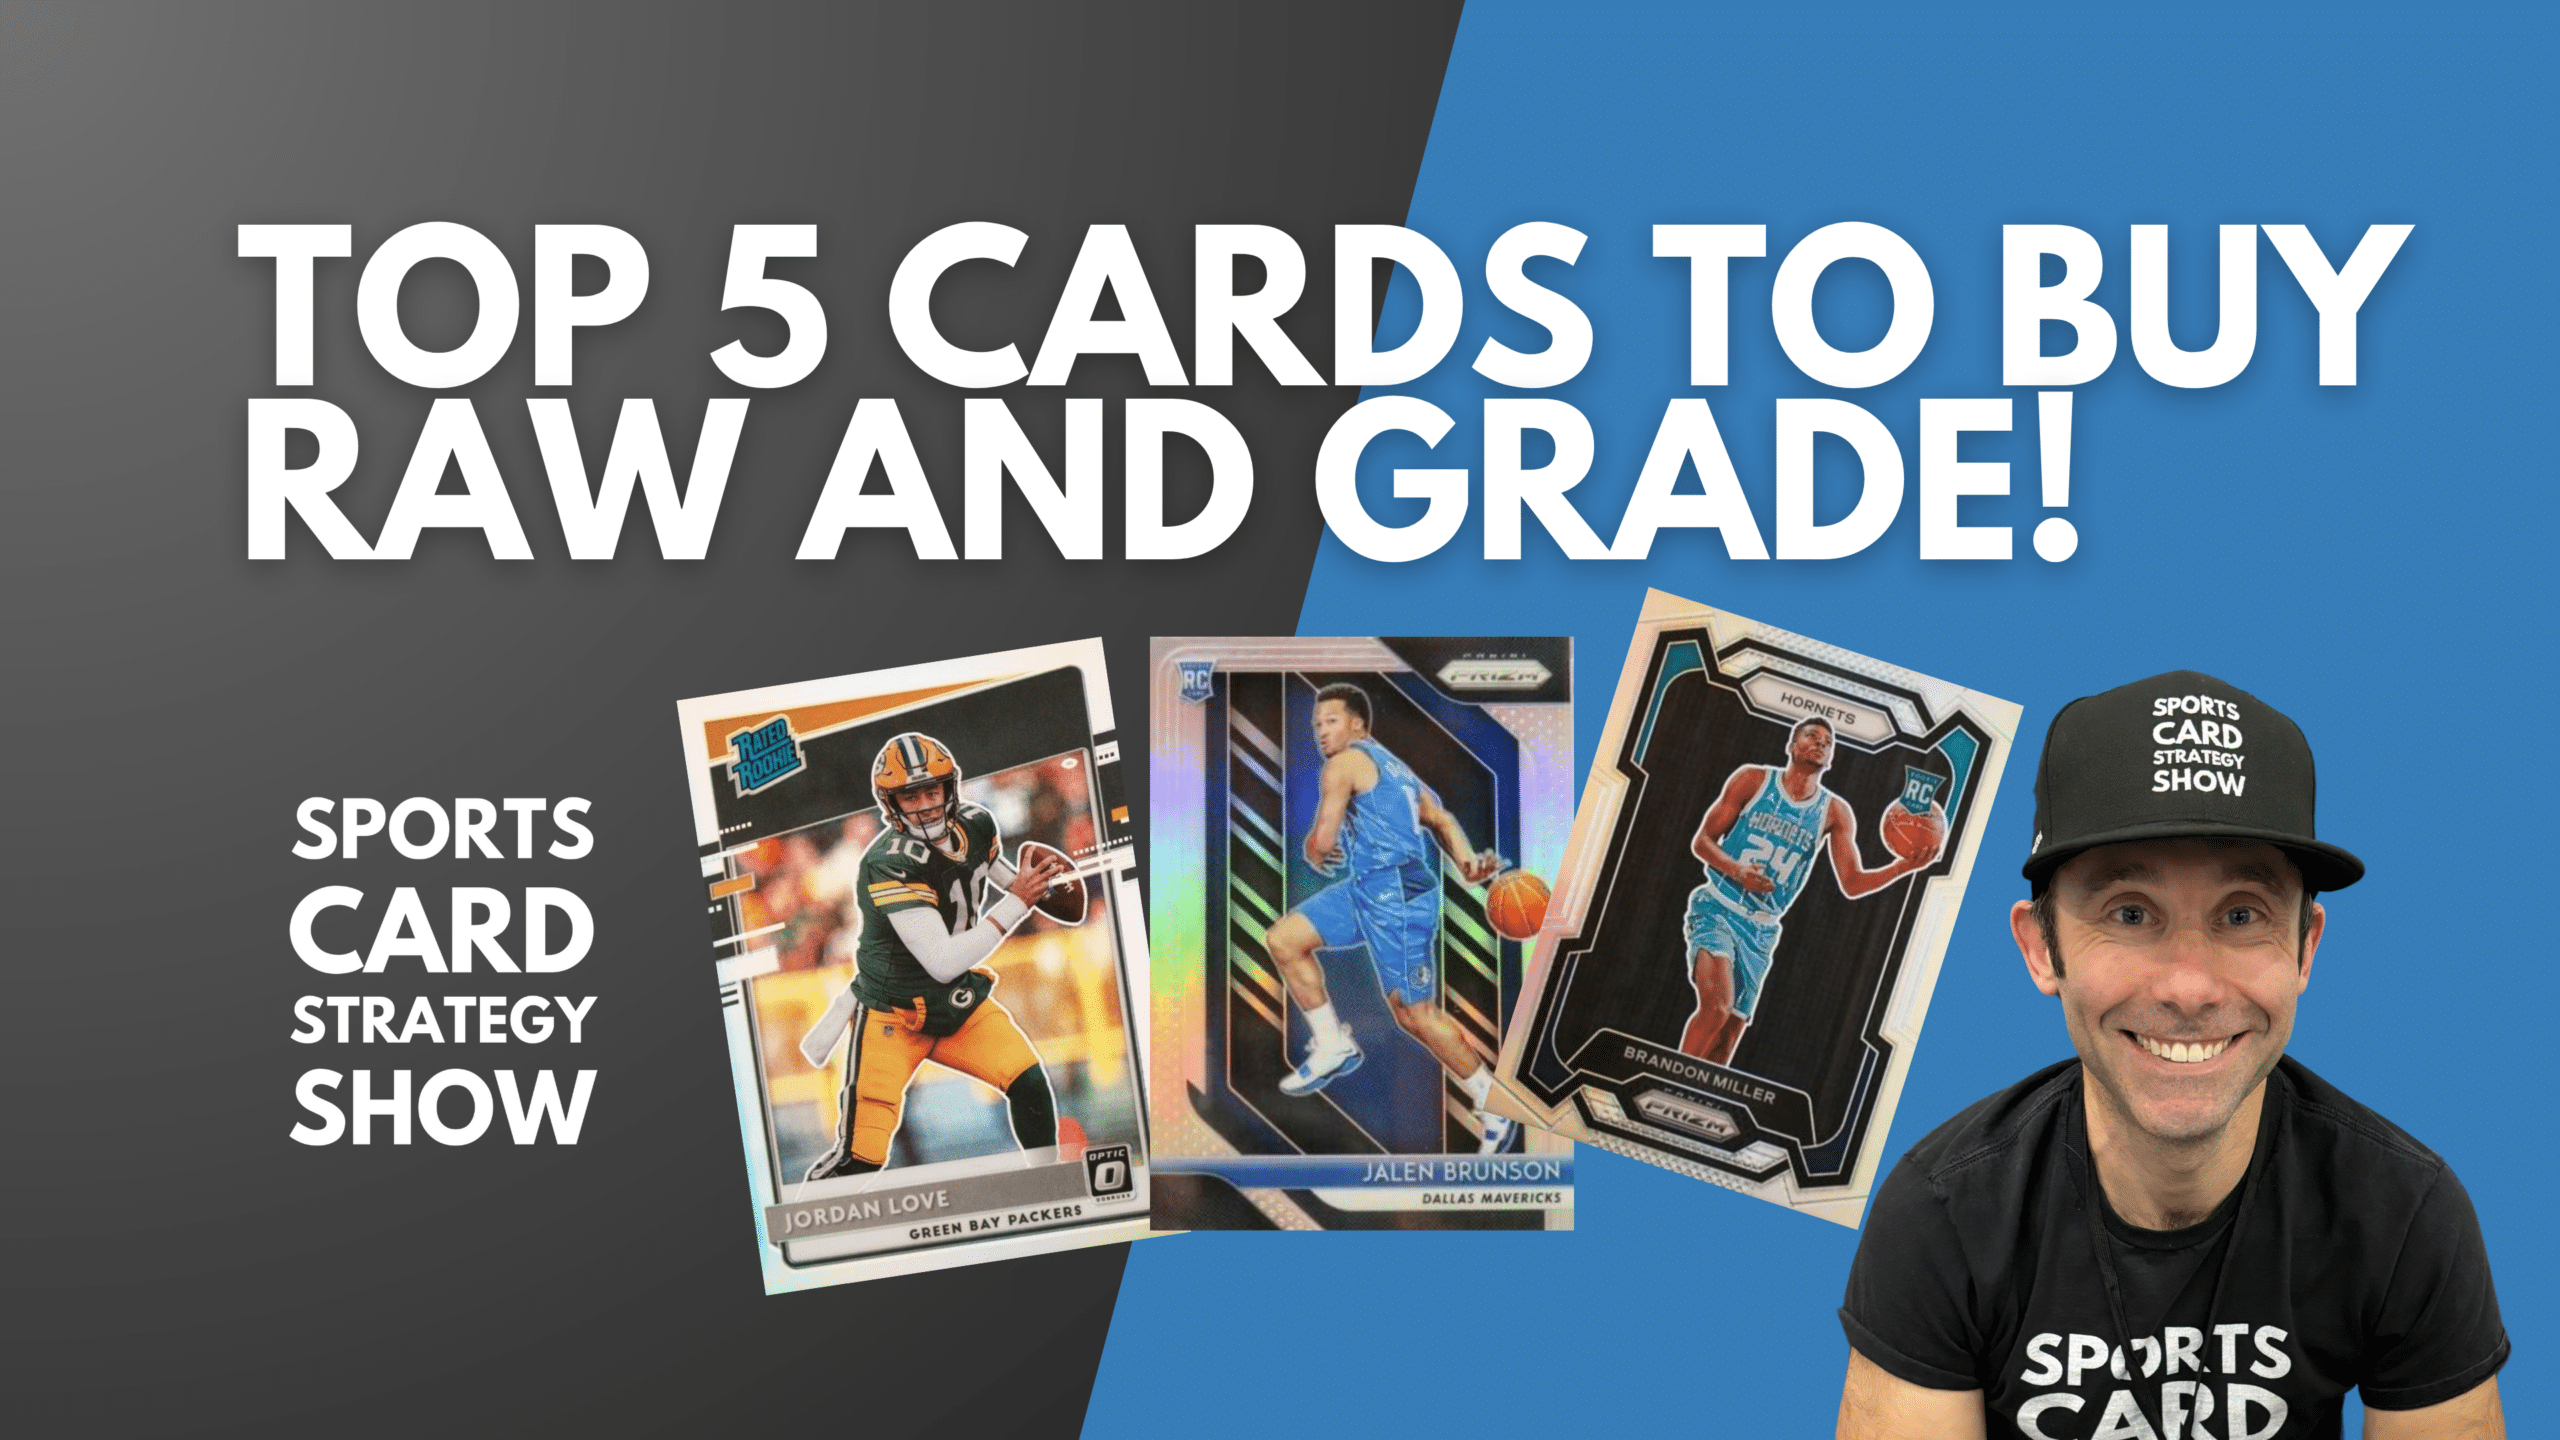 Top 5 Cards To Buy Raw And Grade - High Res - April 15